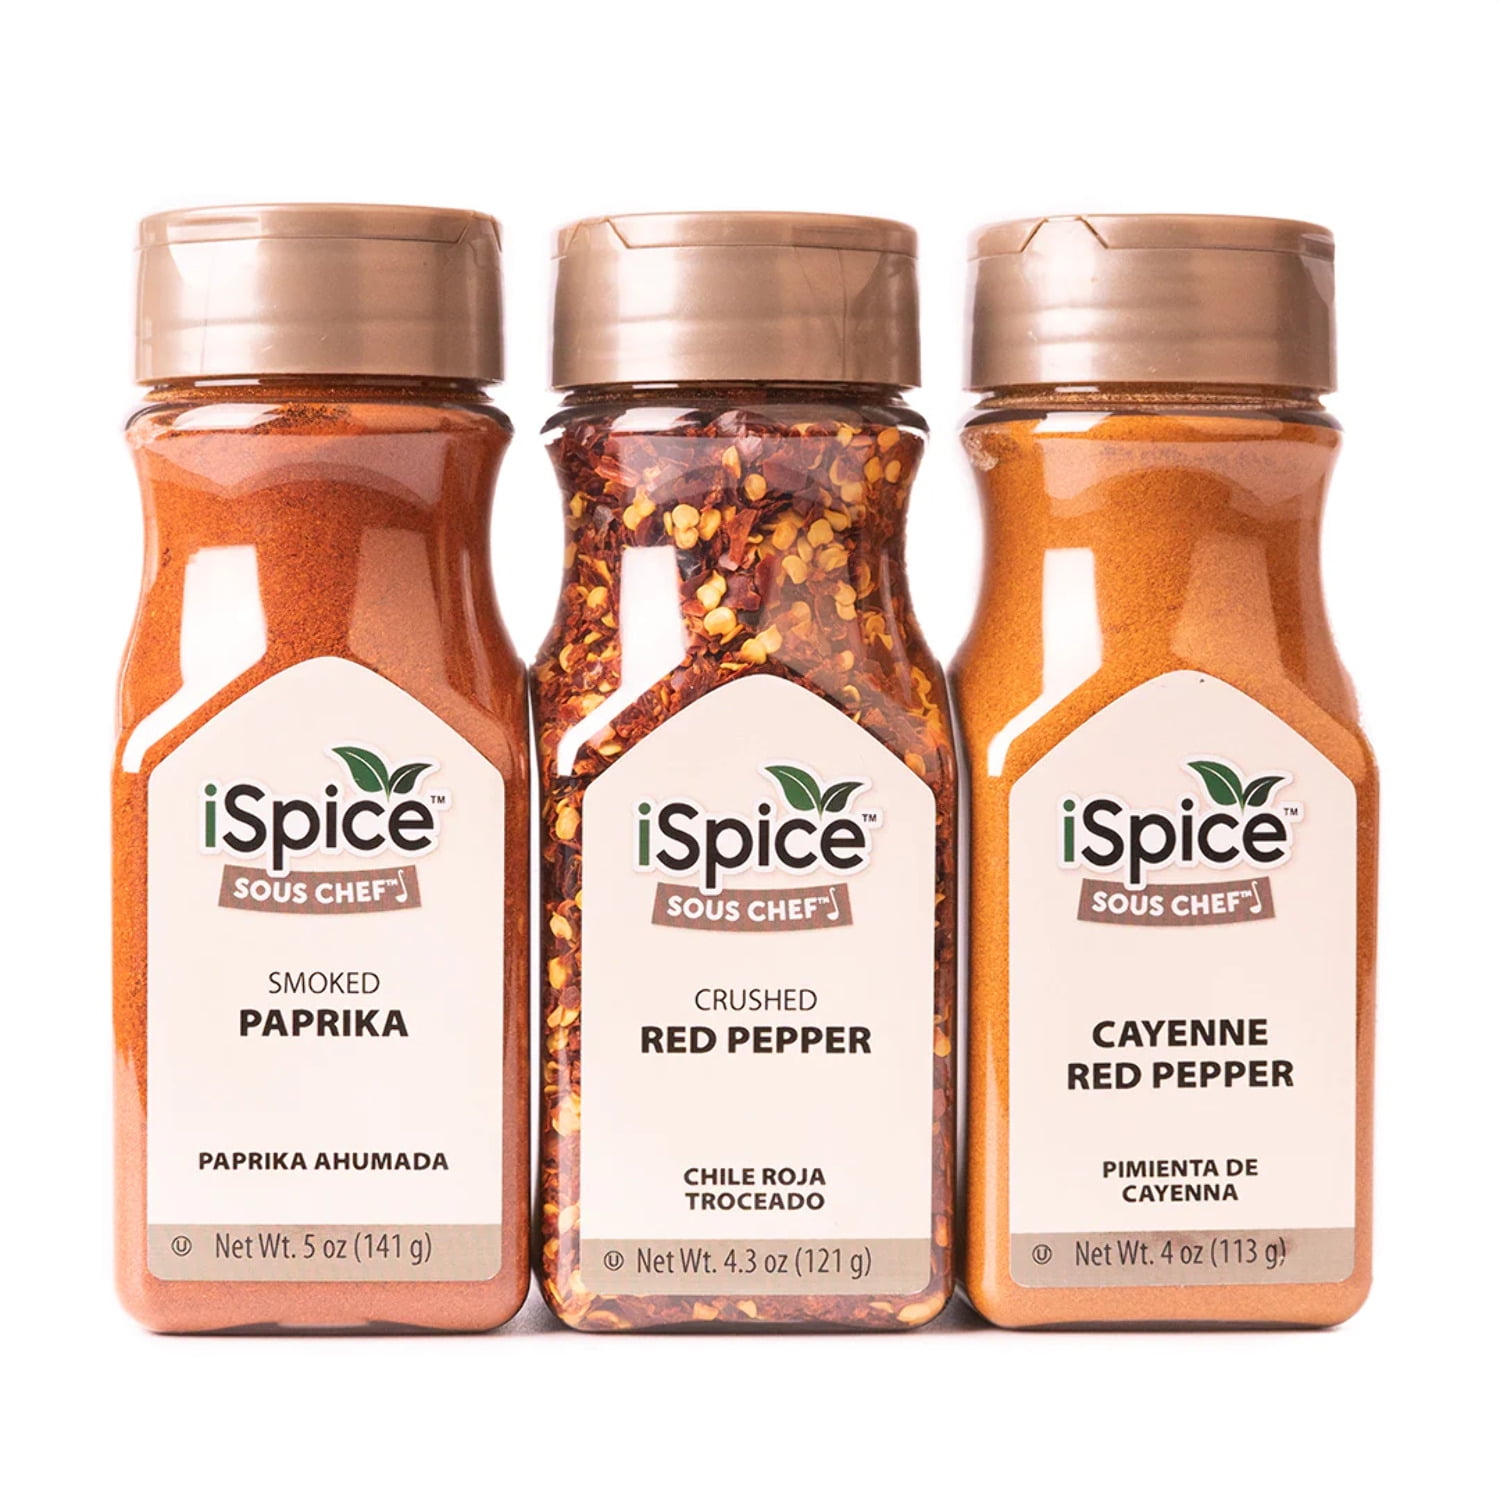 iSpice | 10 Pack of Seasonings | Mix and Match | Mixed Spices & Seasonings Gift Set | Kosher